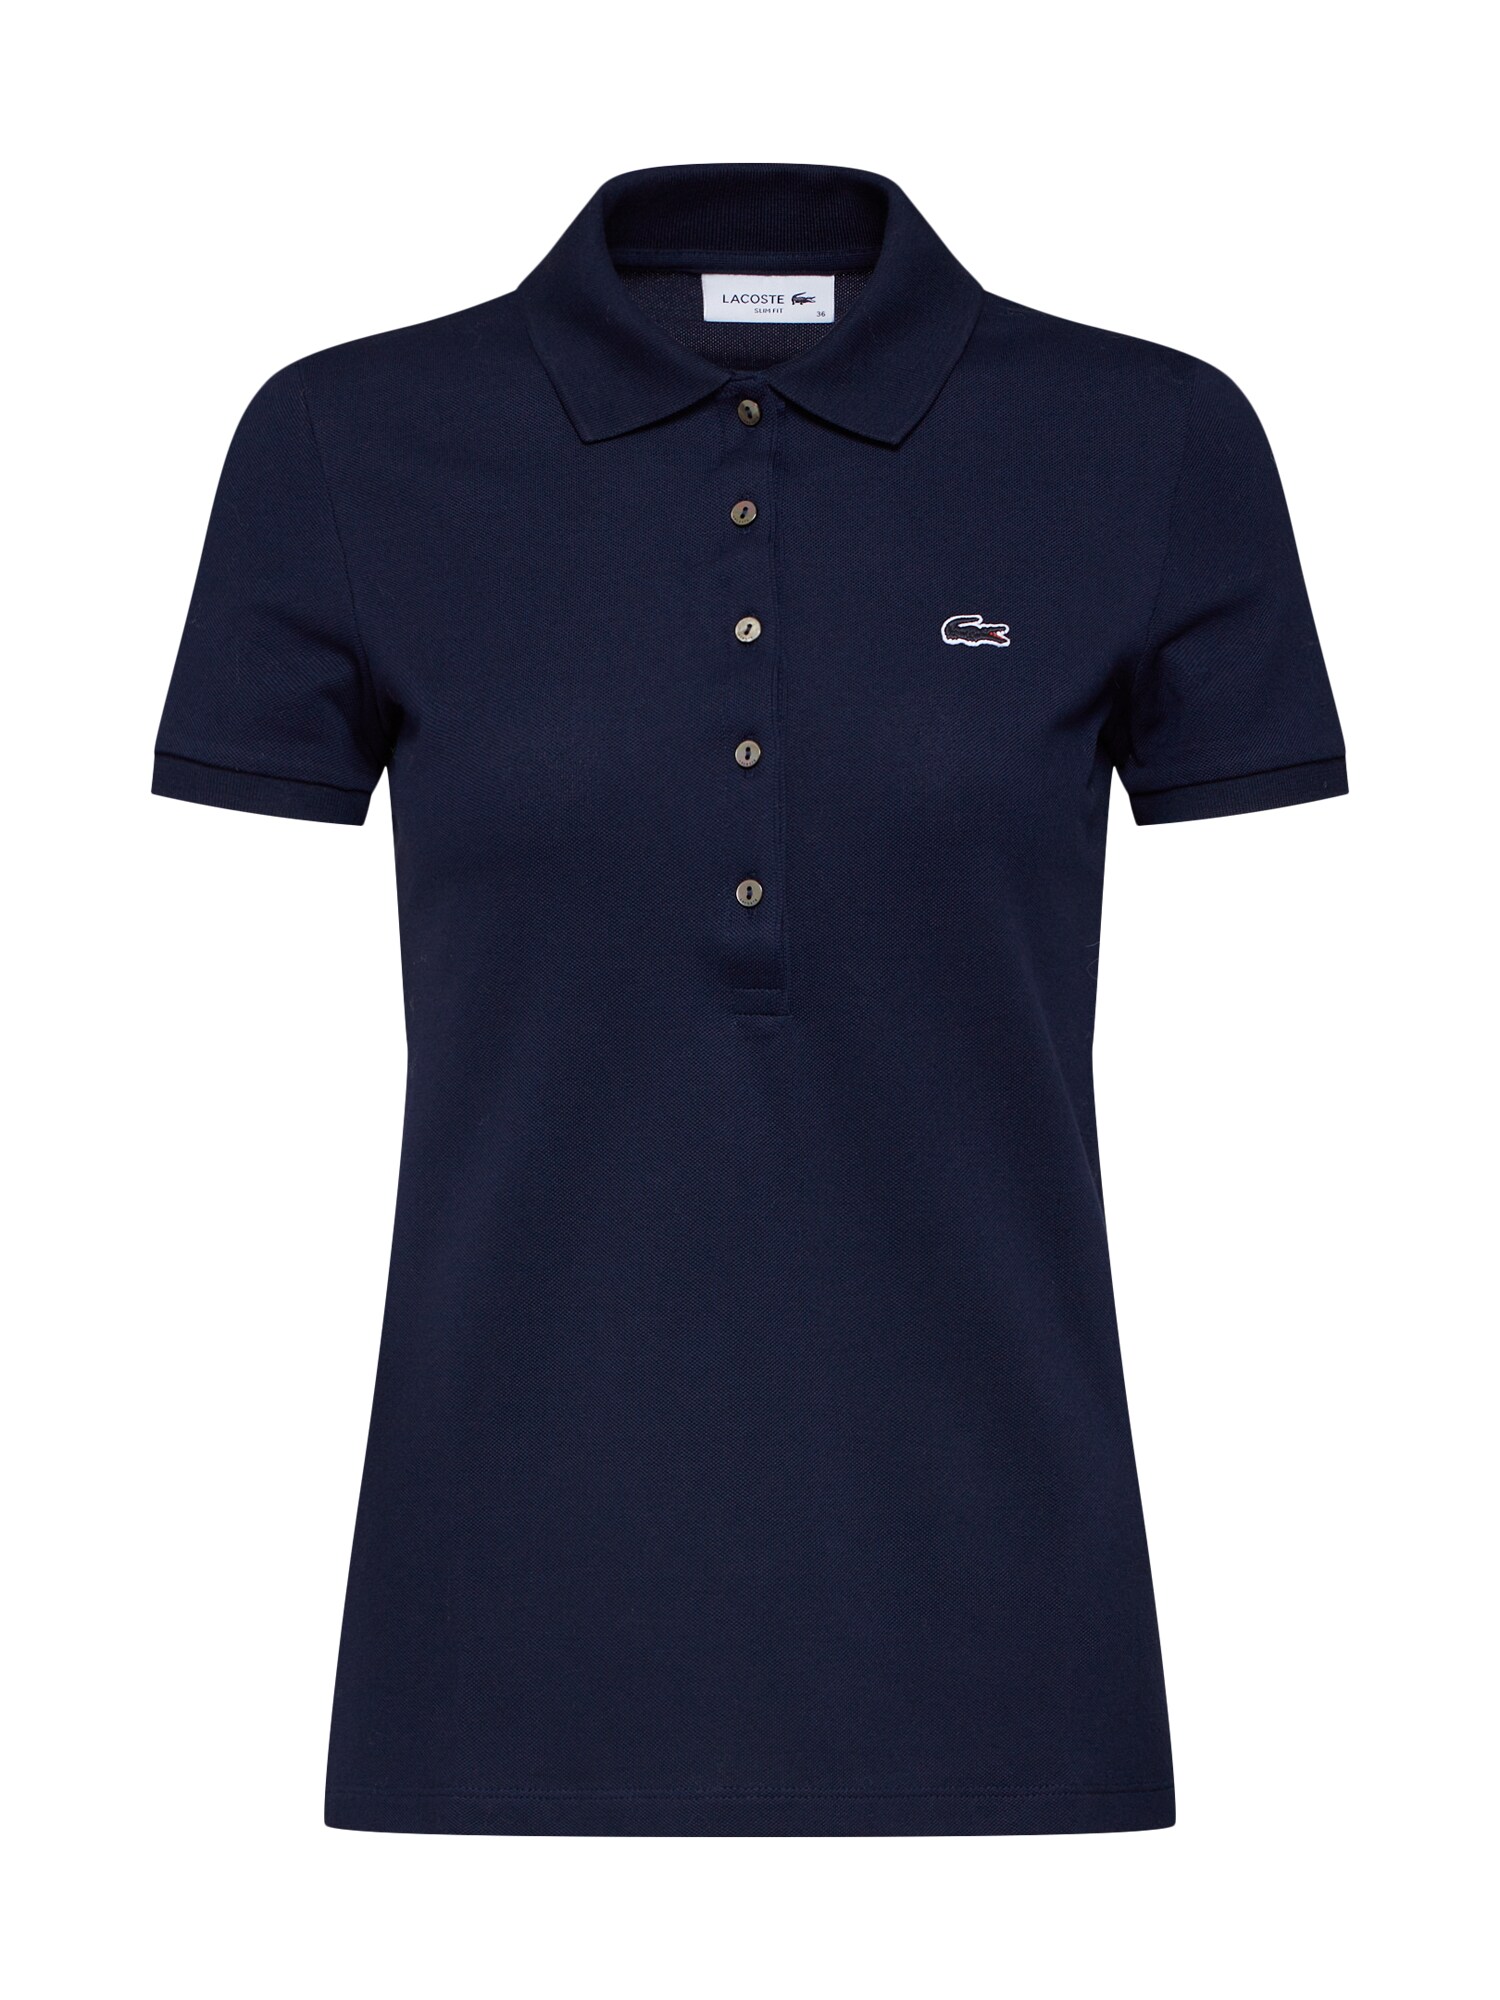 Lacoste LACOSTE Poloshirt navy / rot / weiß